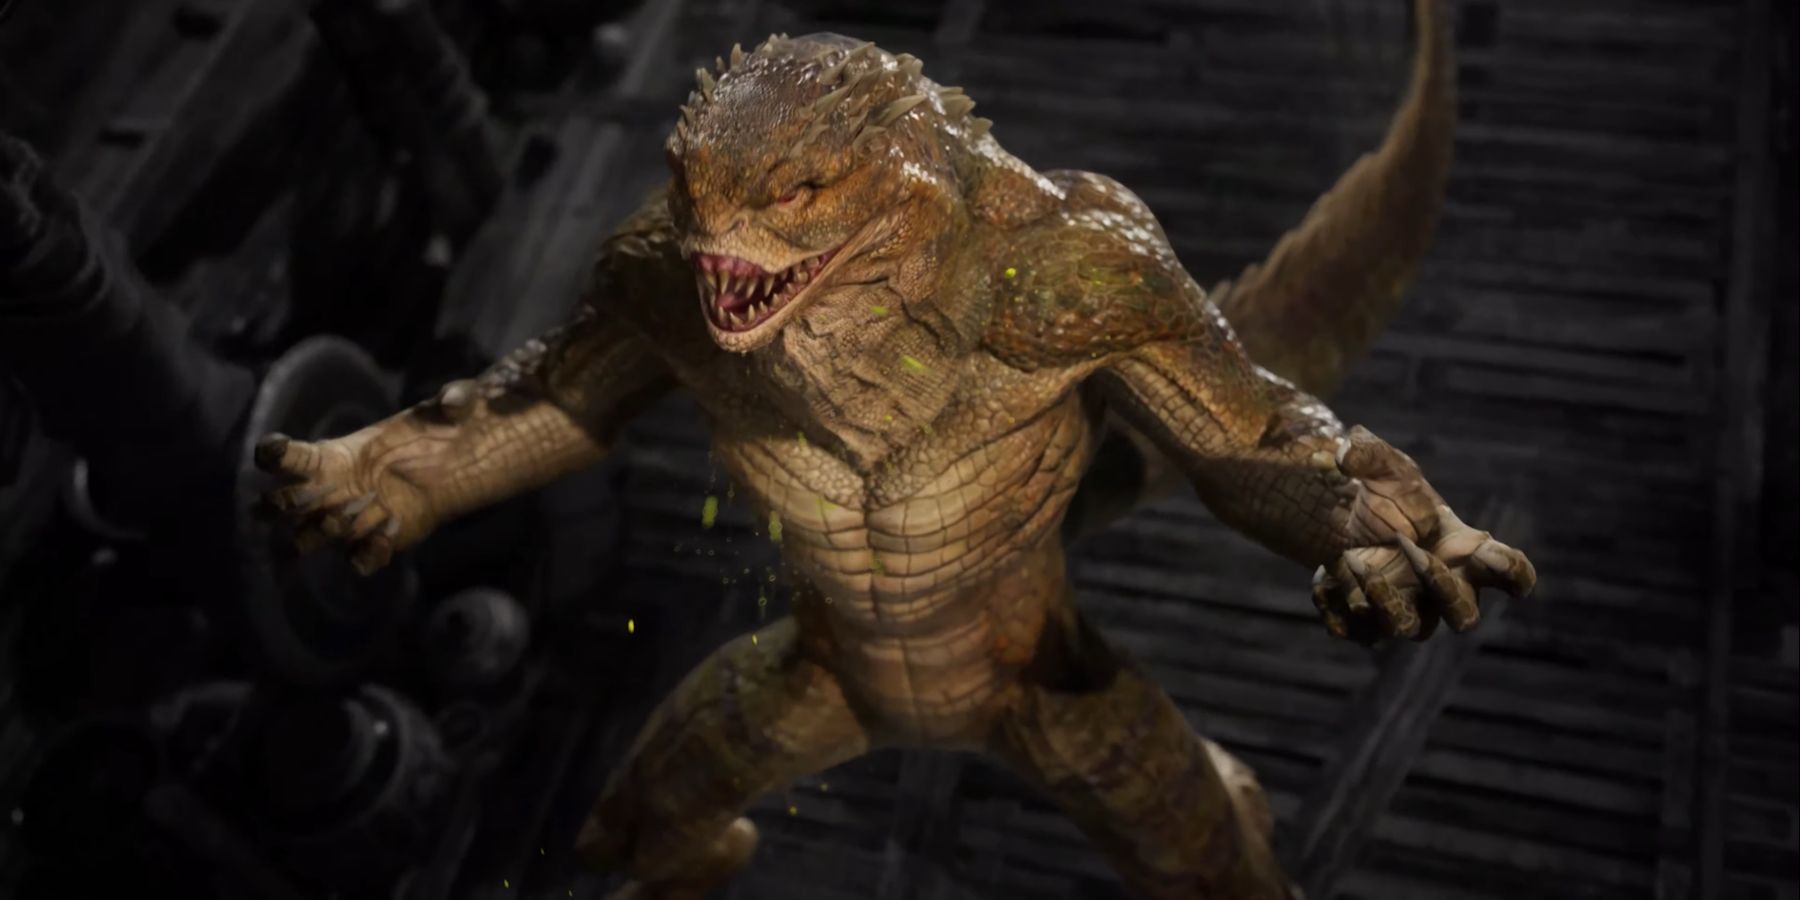 Reptile's true form from the Mortal Kombat 1 "Banished" trailer